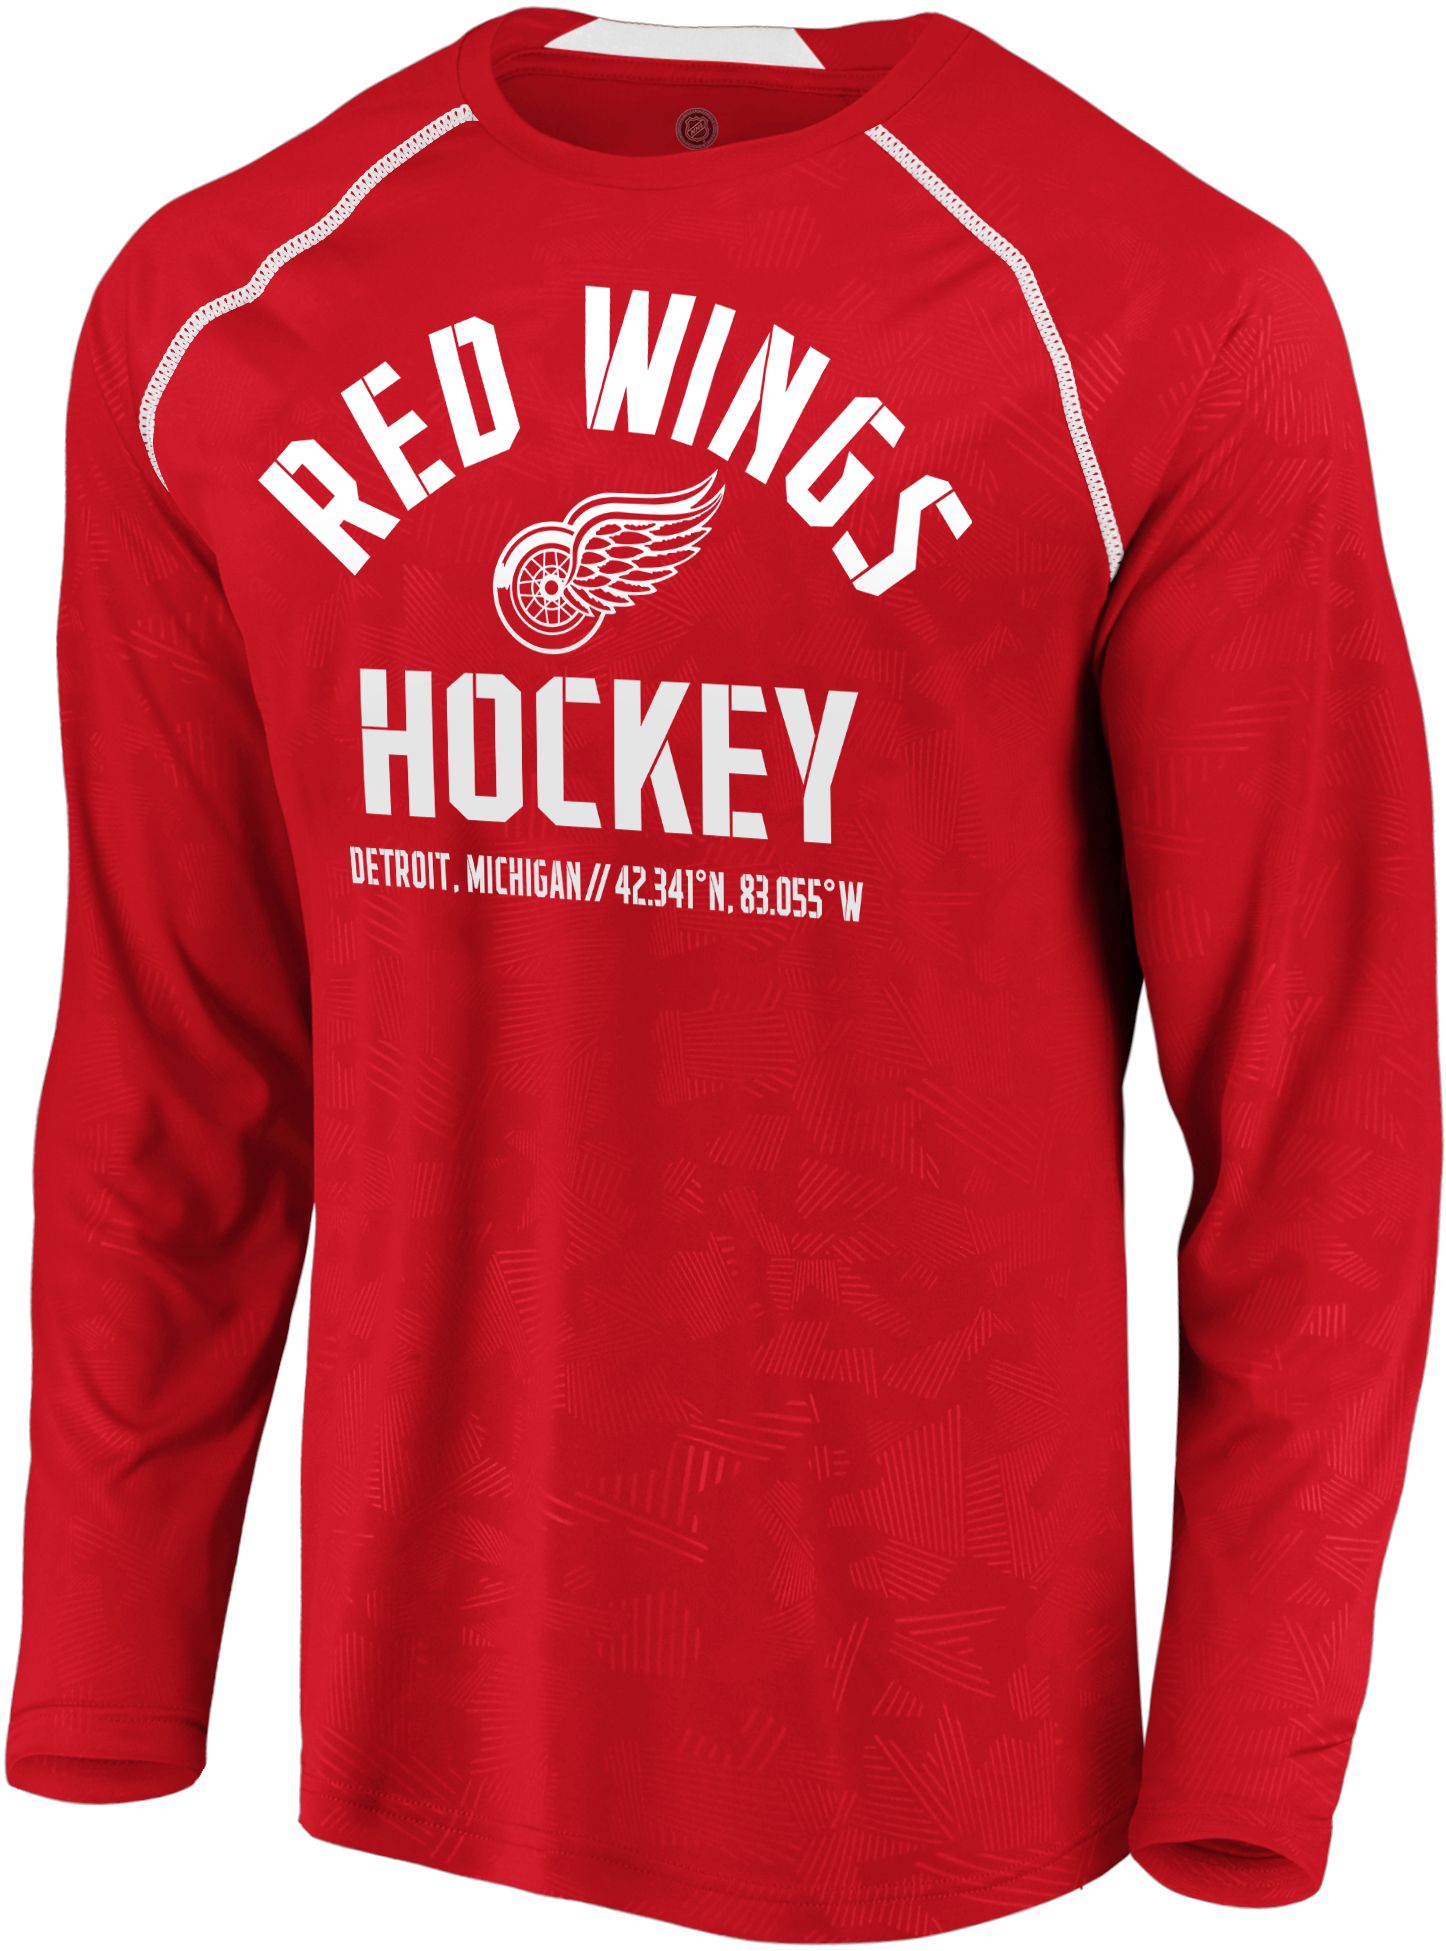 red wings long sleeve t shirt